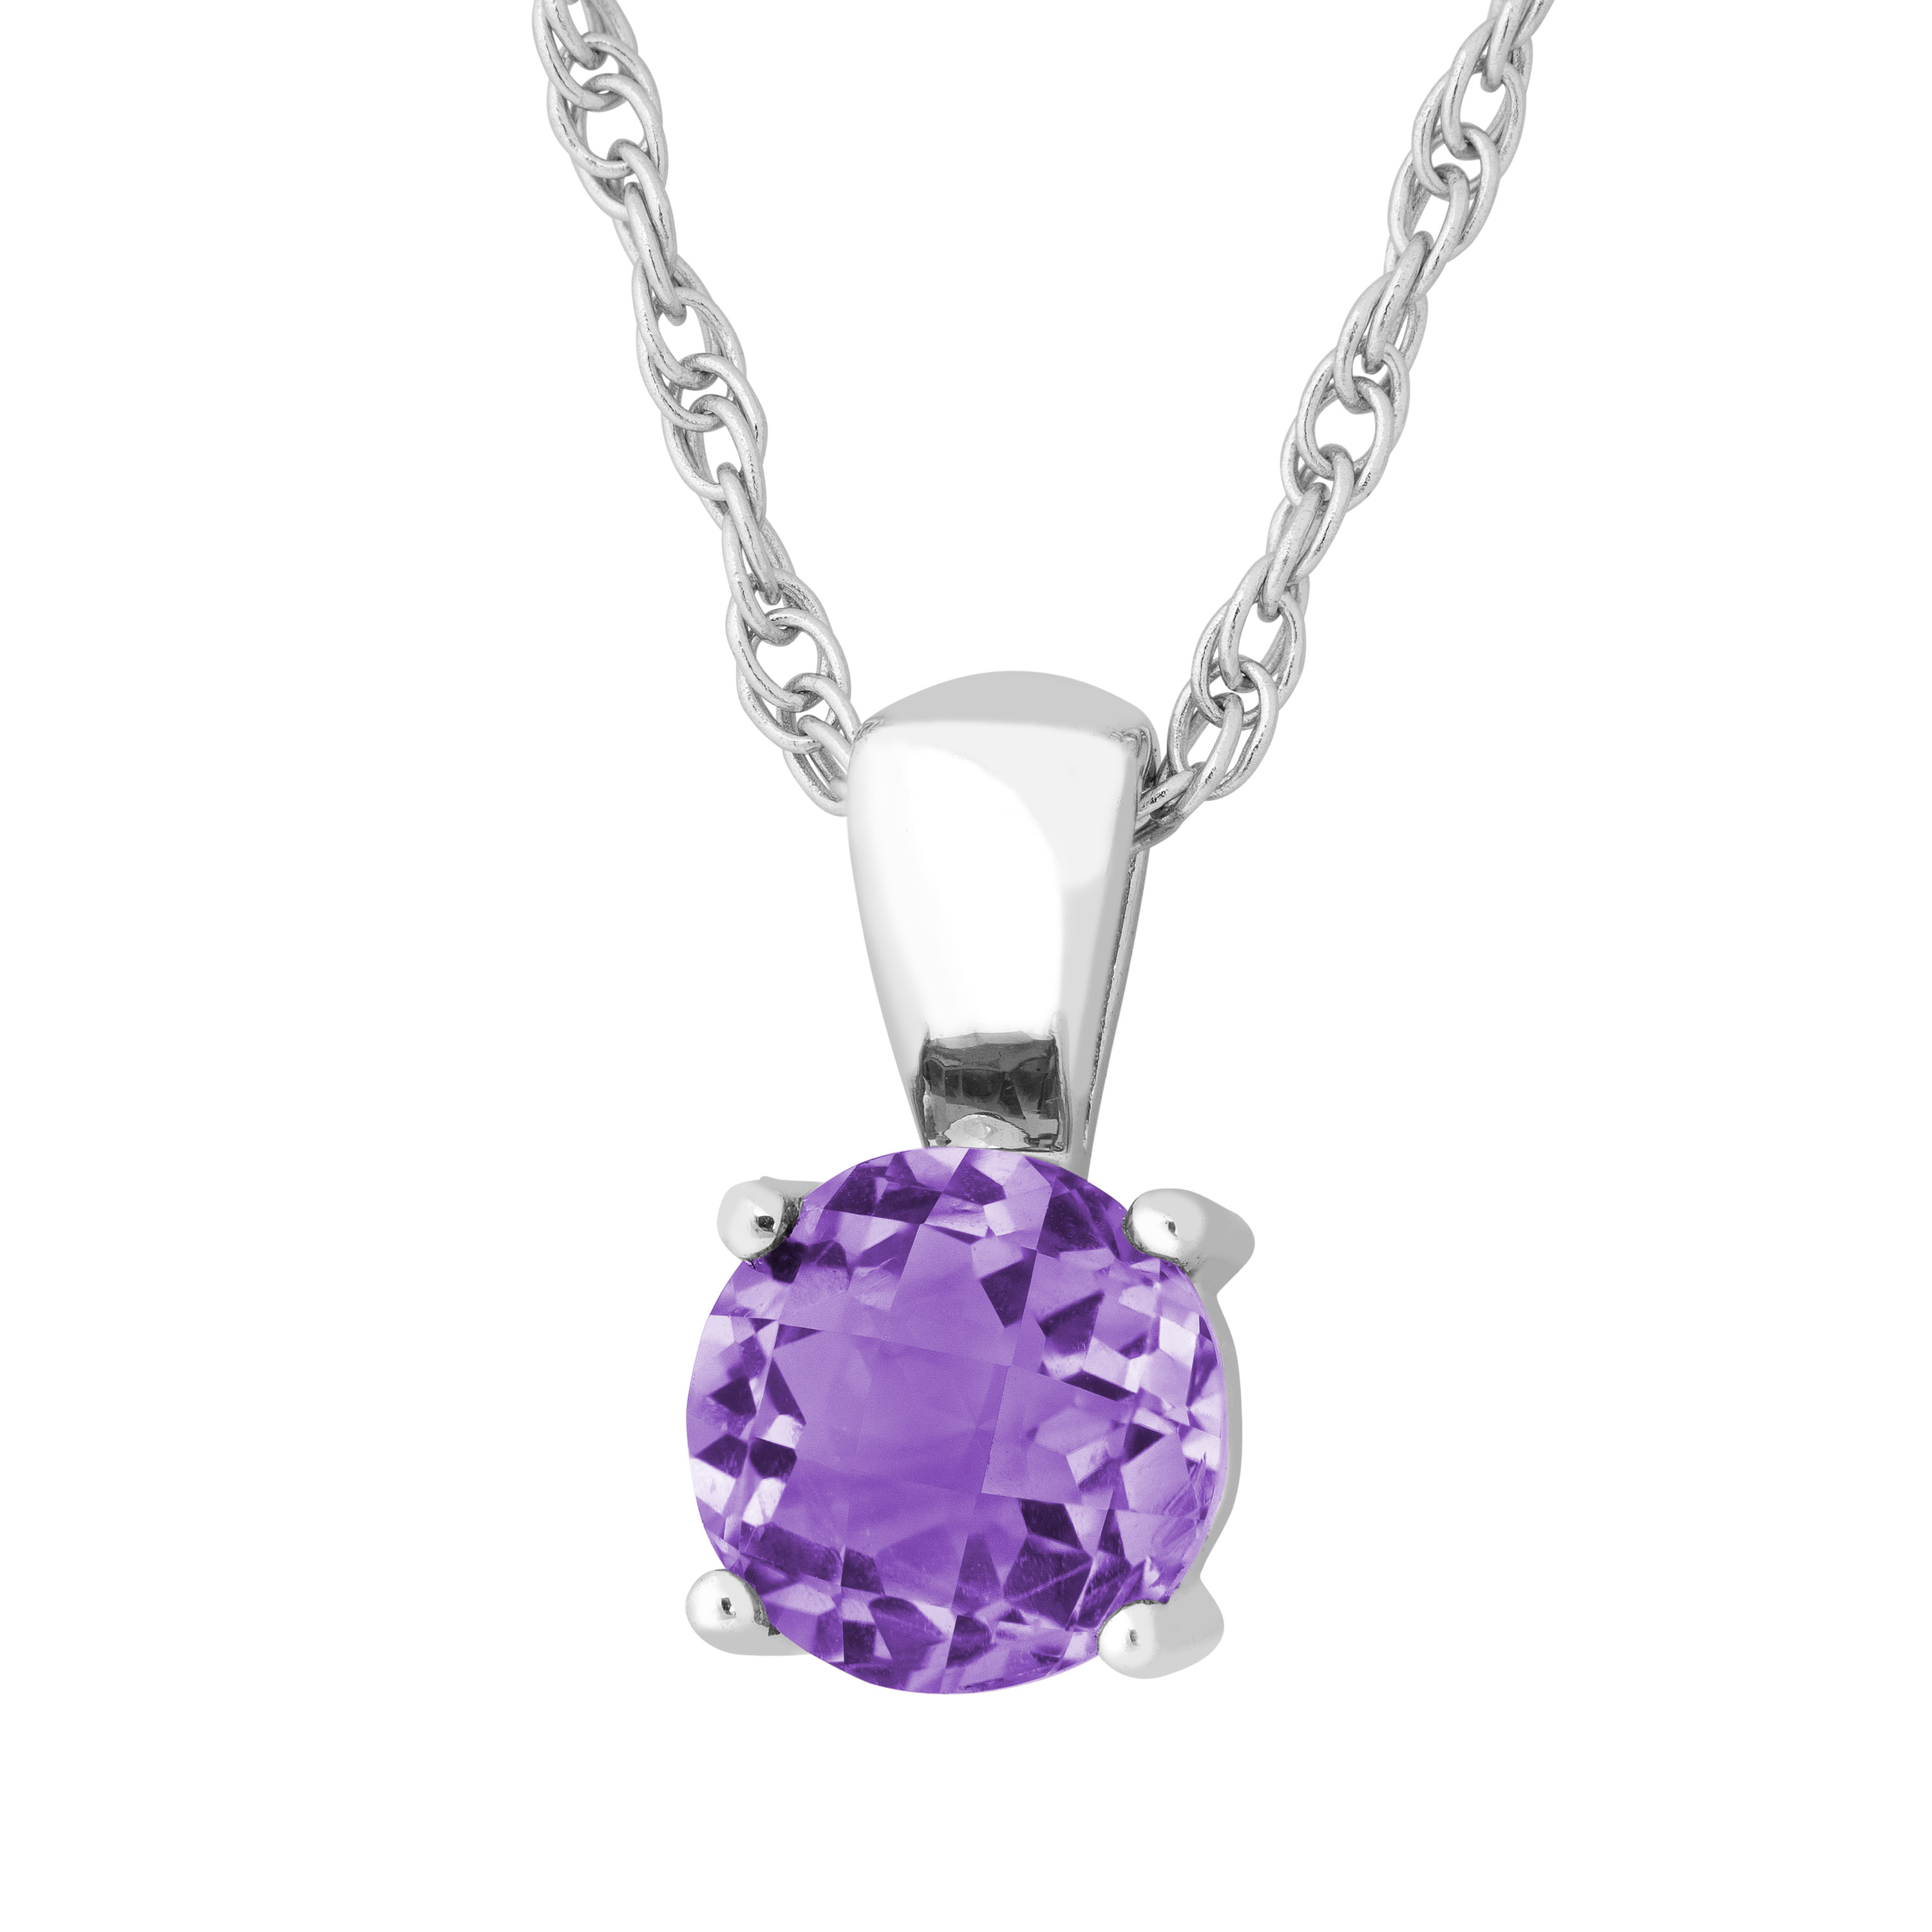 Round  Brazillian Amethyst Pendant Necklace, Rhodium Plated Sterling Silver